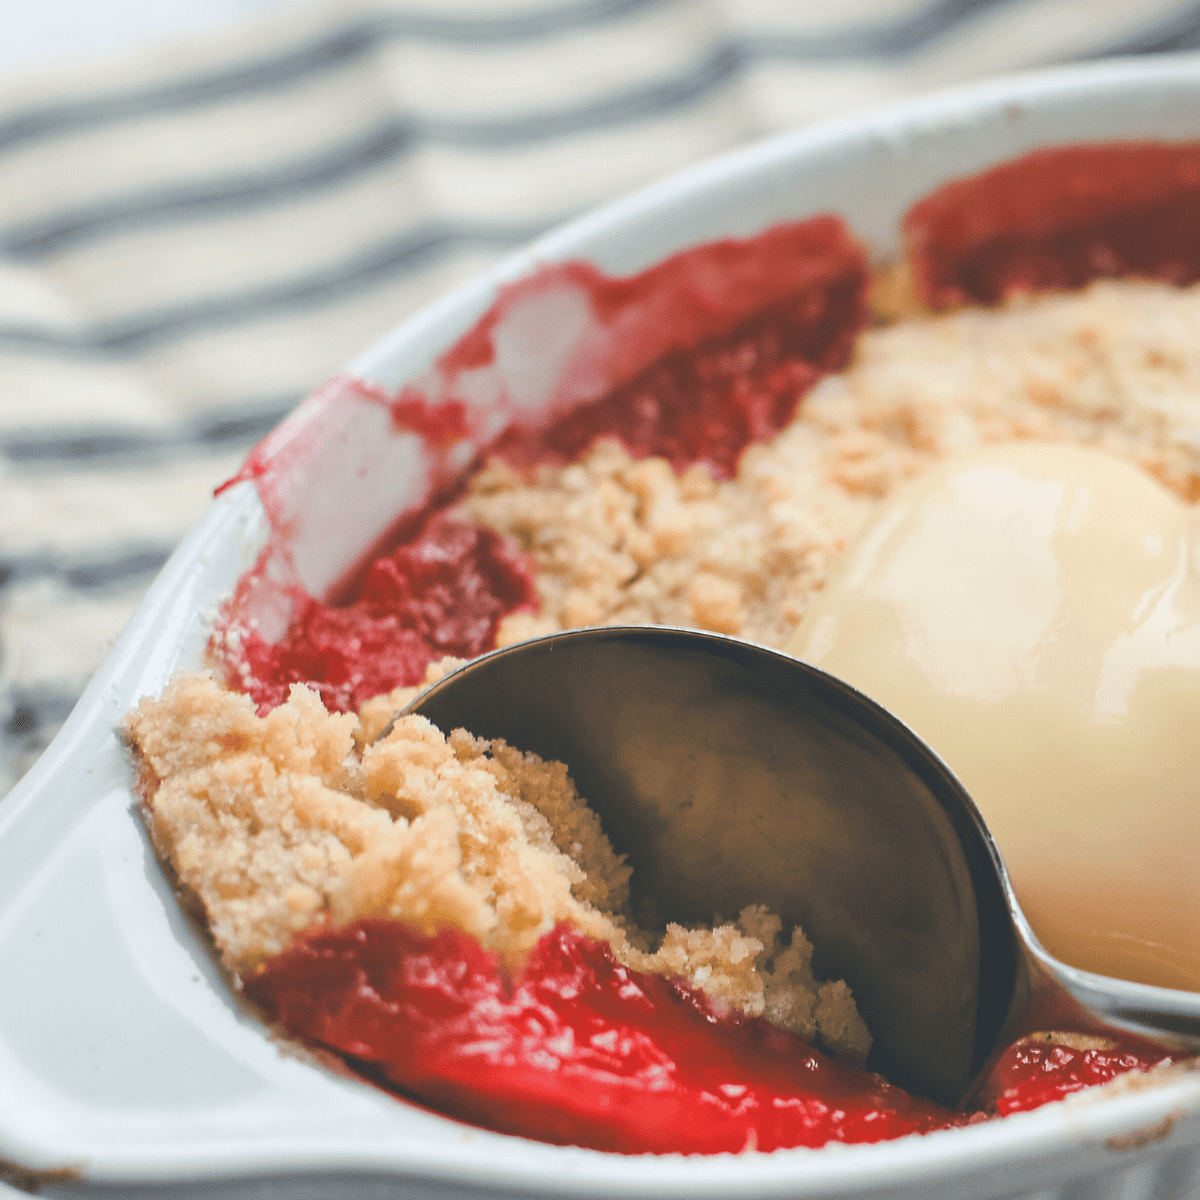 A fruit crumble with a spoonful taken out.